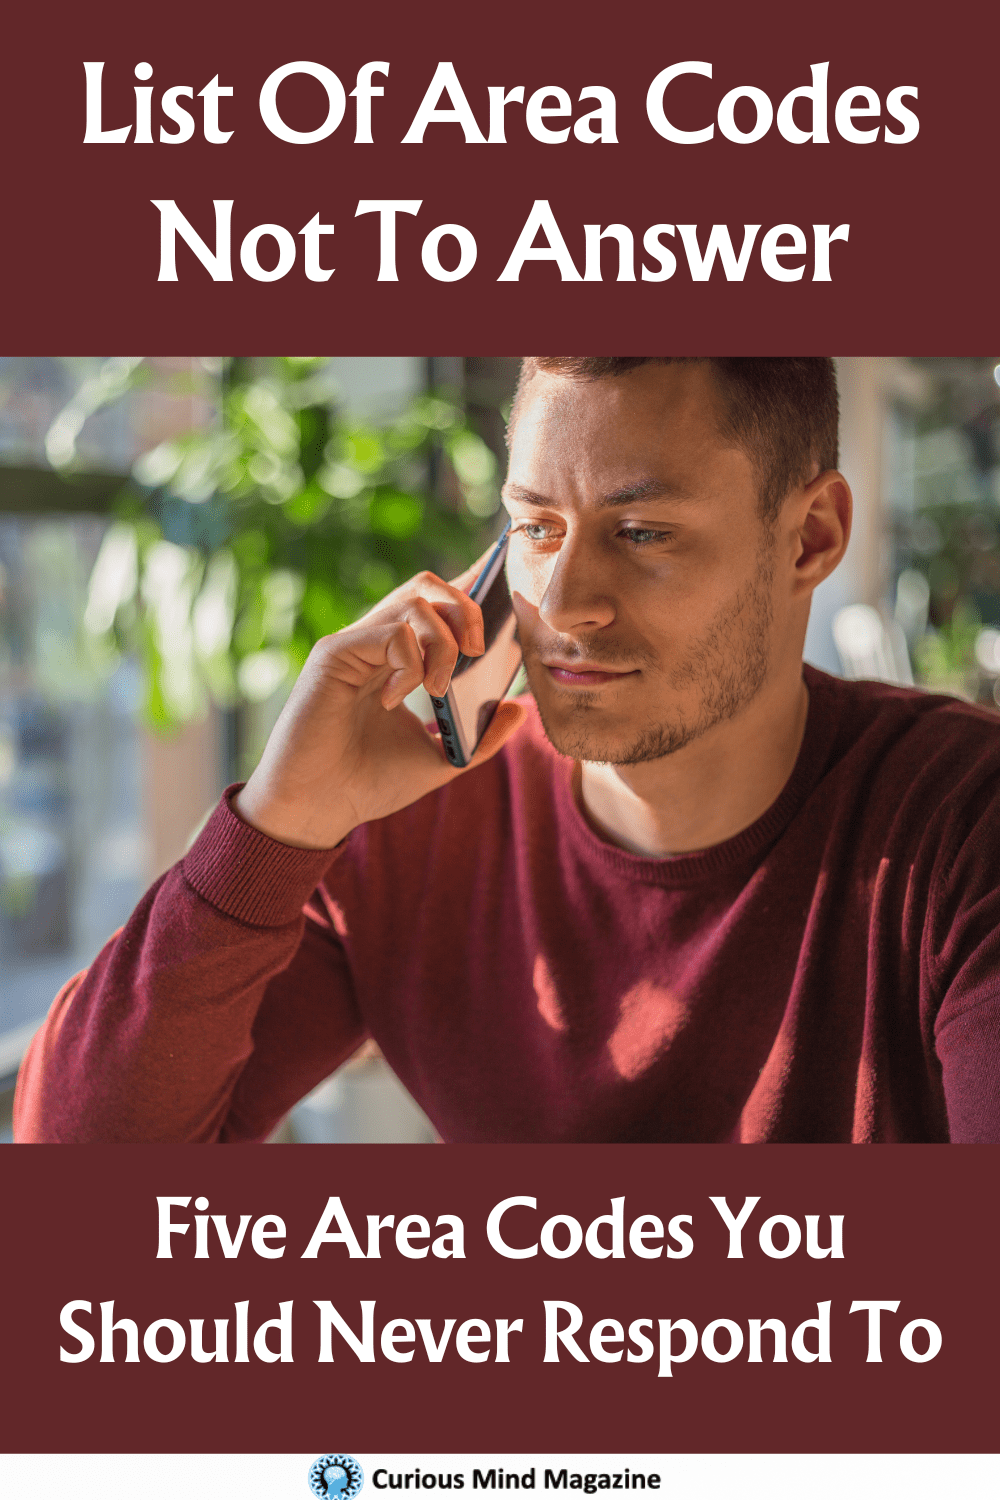 List Of Area Codes Not To Answer - Five Area Codes You Should Never Respond To